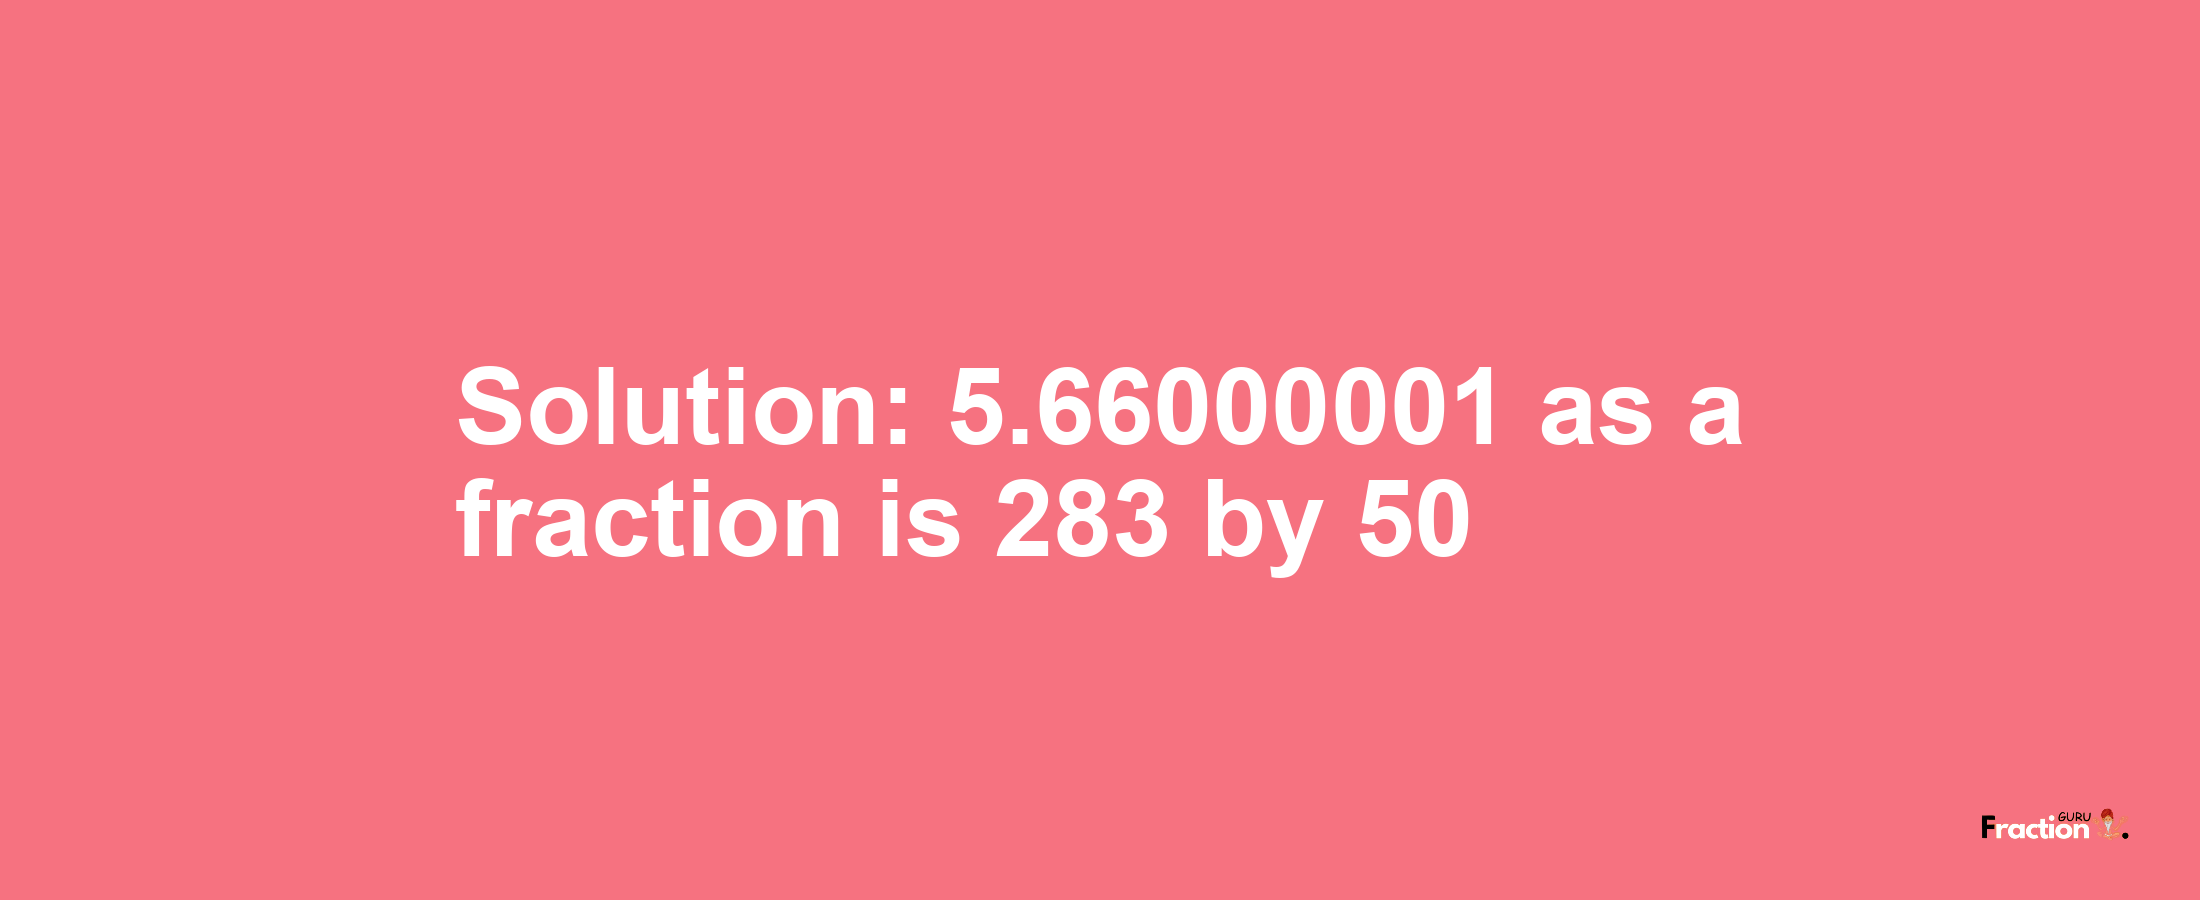 Solution:5.66000001 as a fraction is 283/50